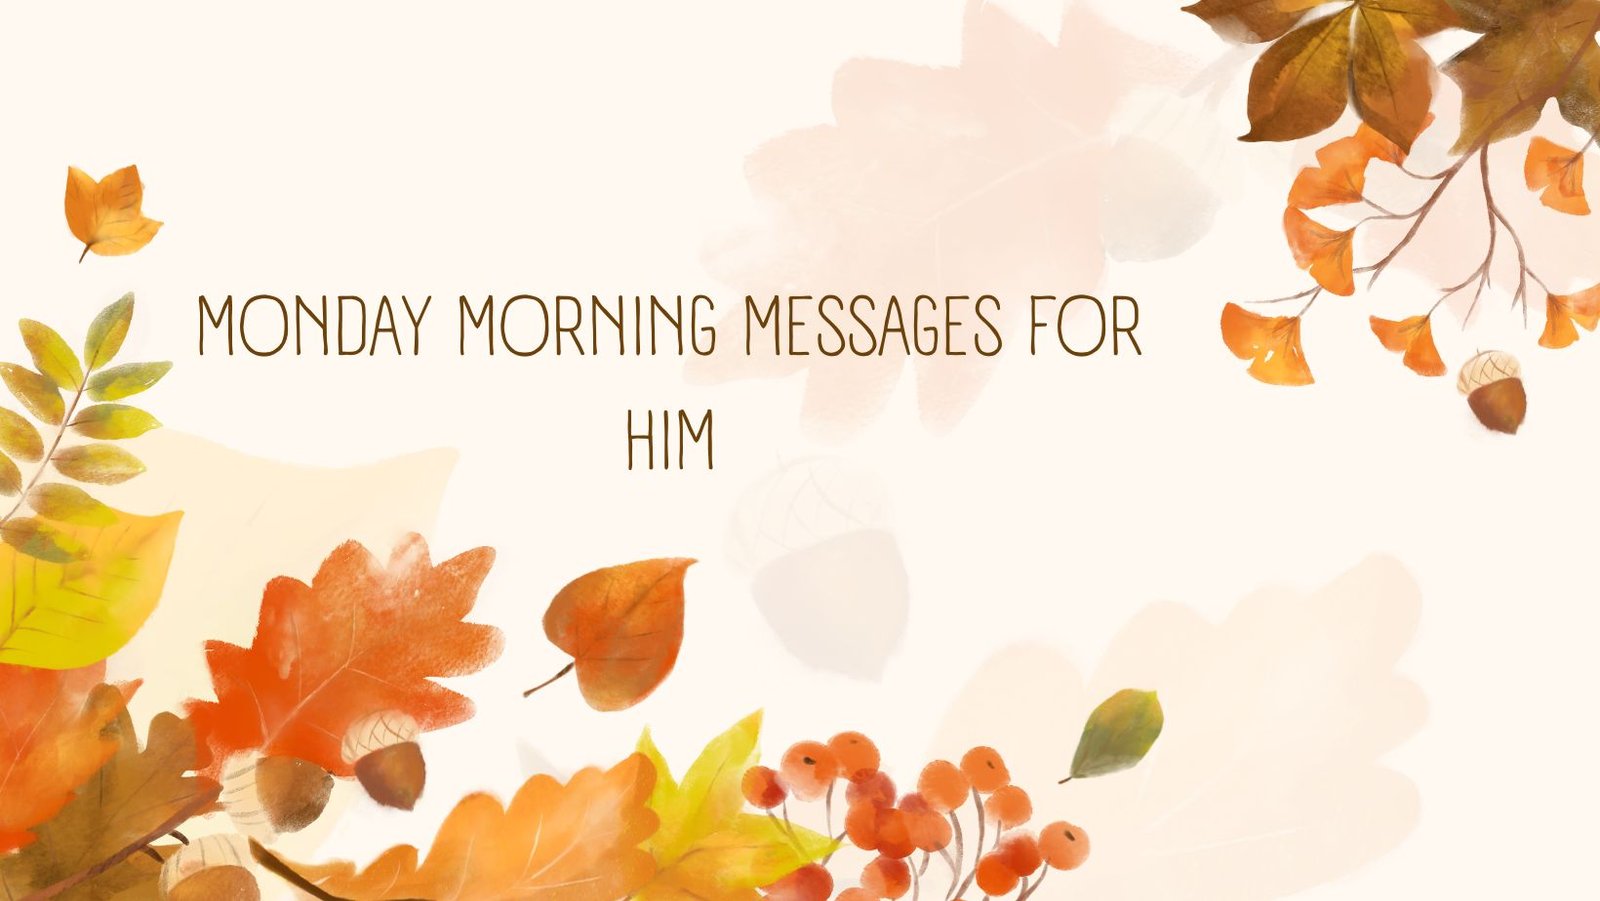 Monday Morning Messages For Him